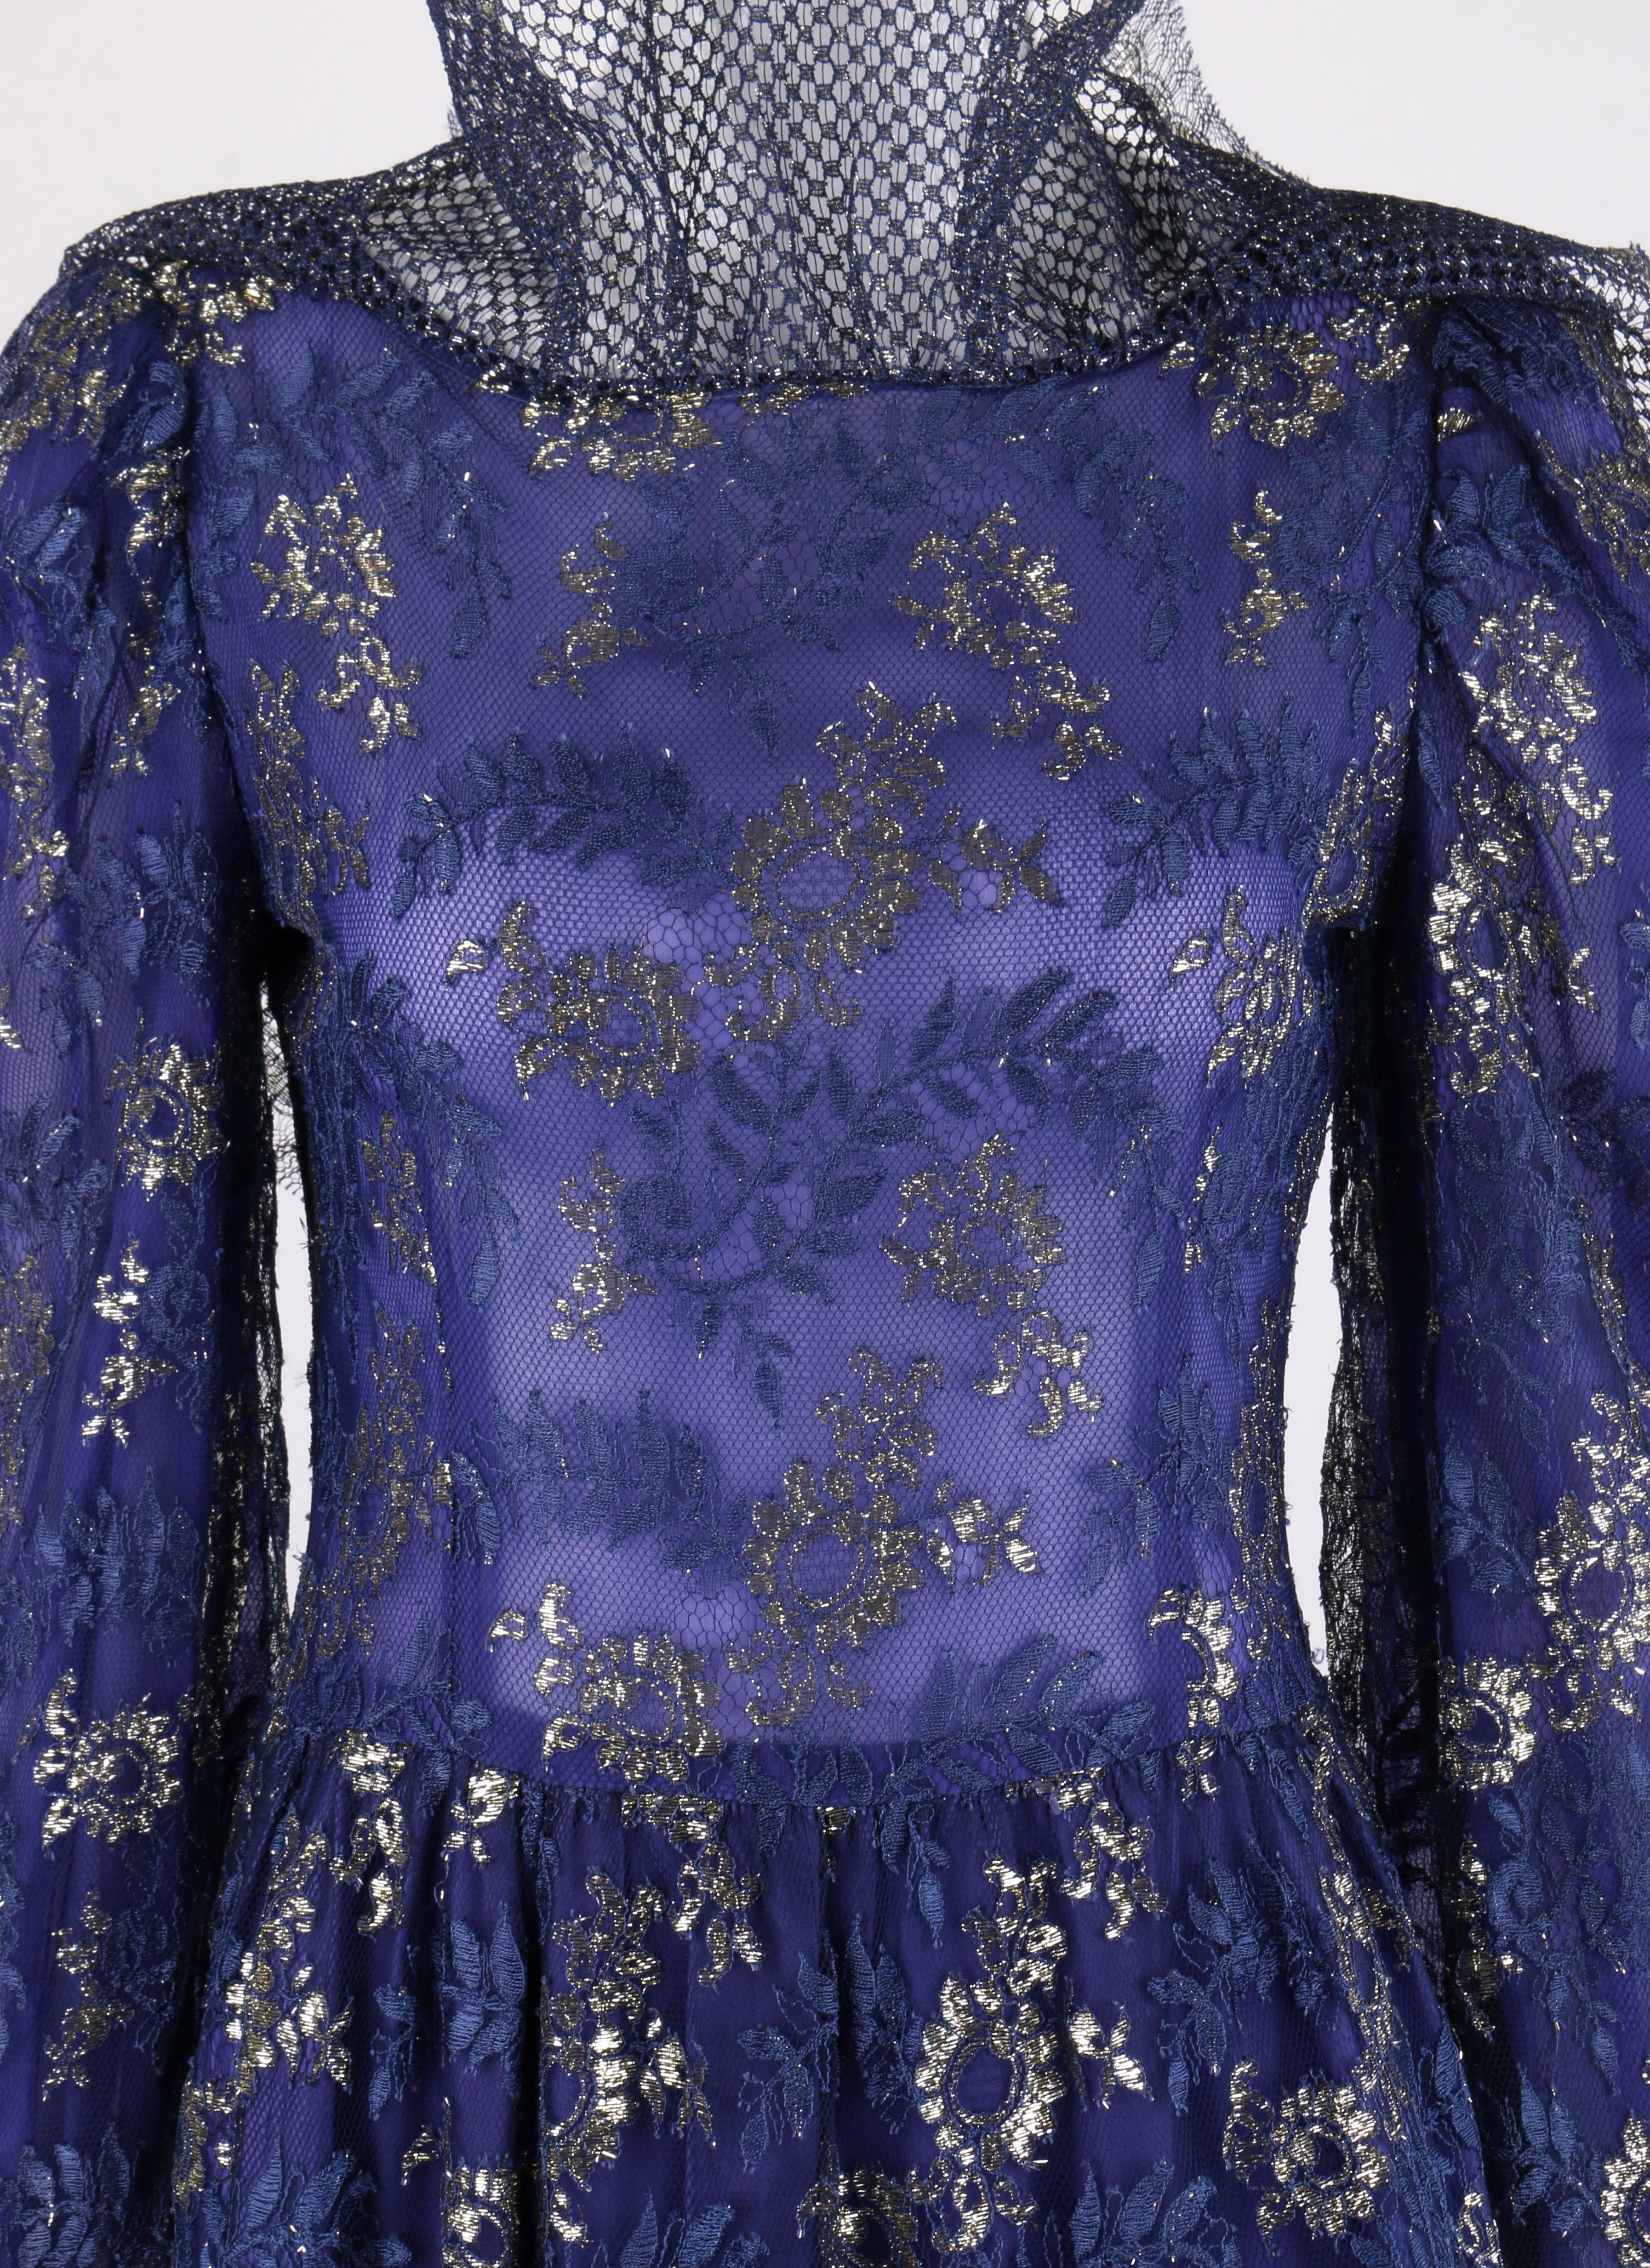 LANVIN Haute Couture c.1970s Periwinkle Gold Floral Lace Overlay Maxi Dress For Sale 1